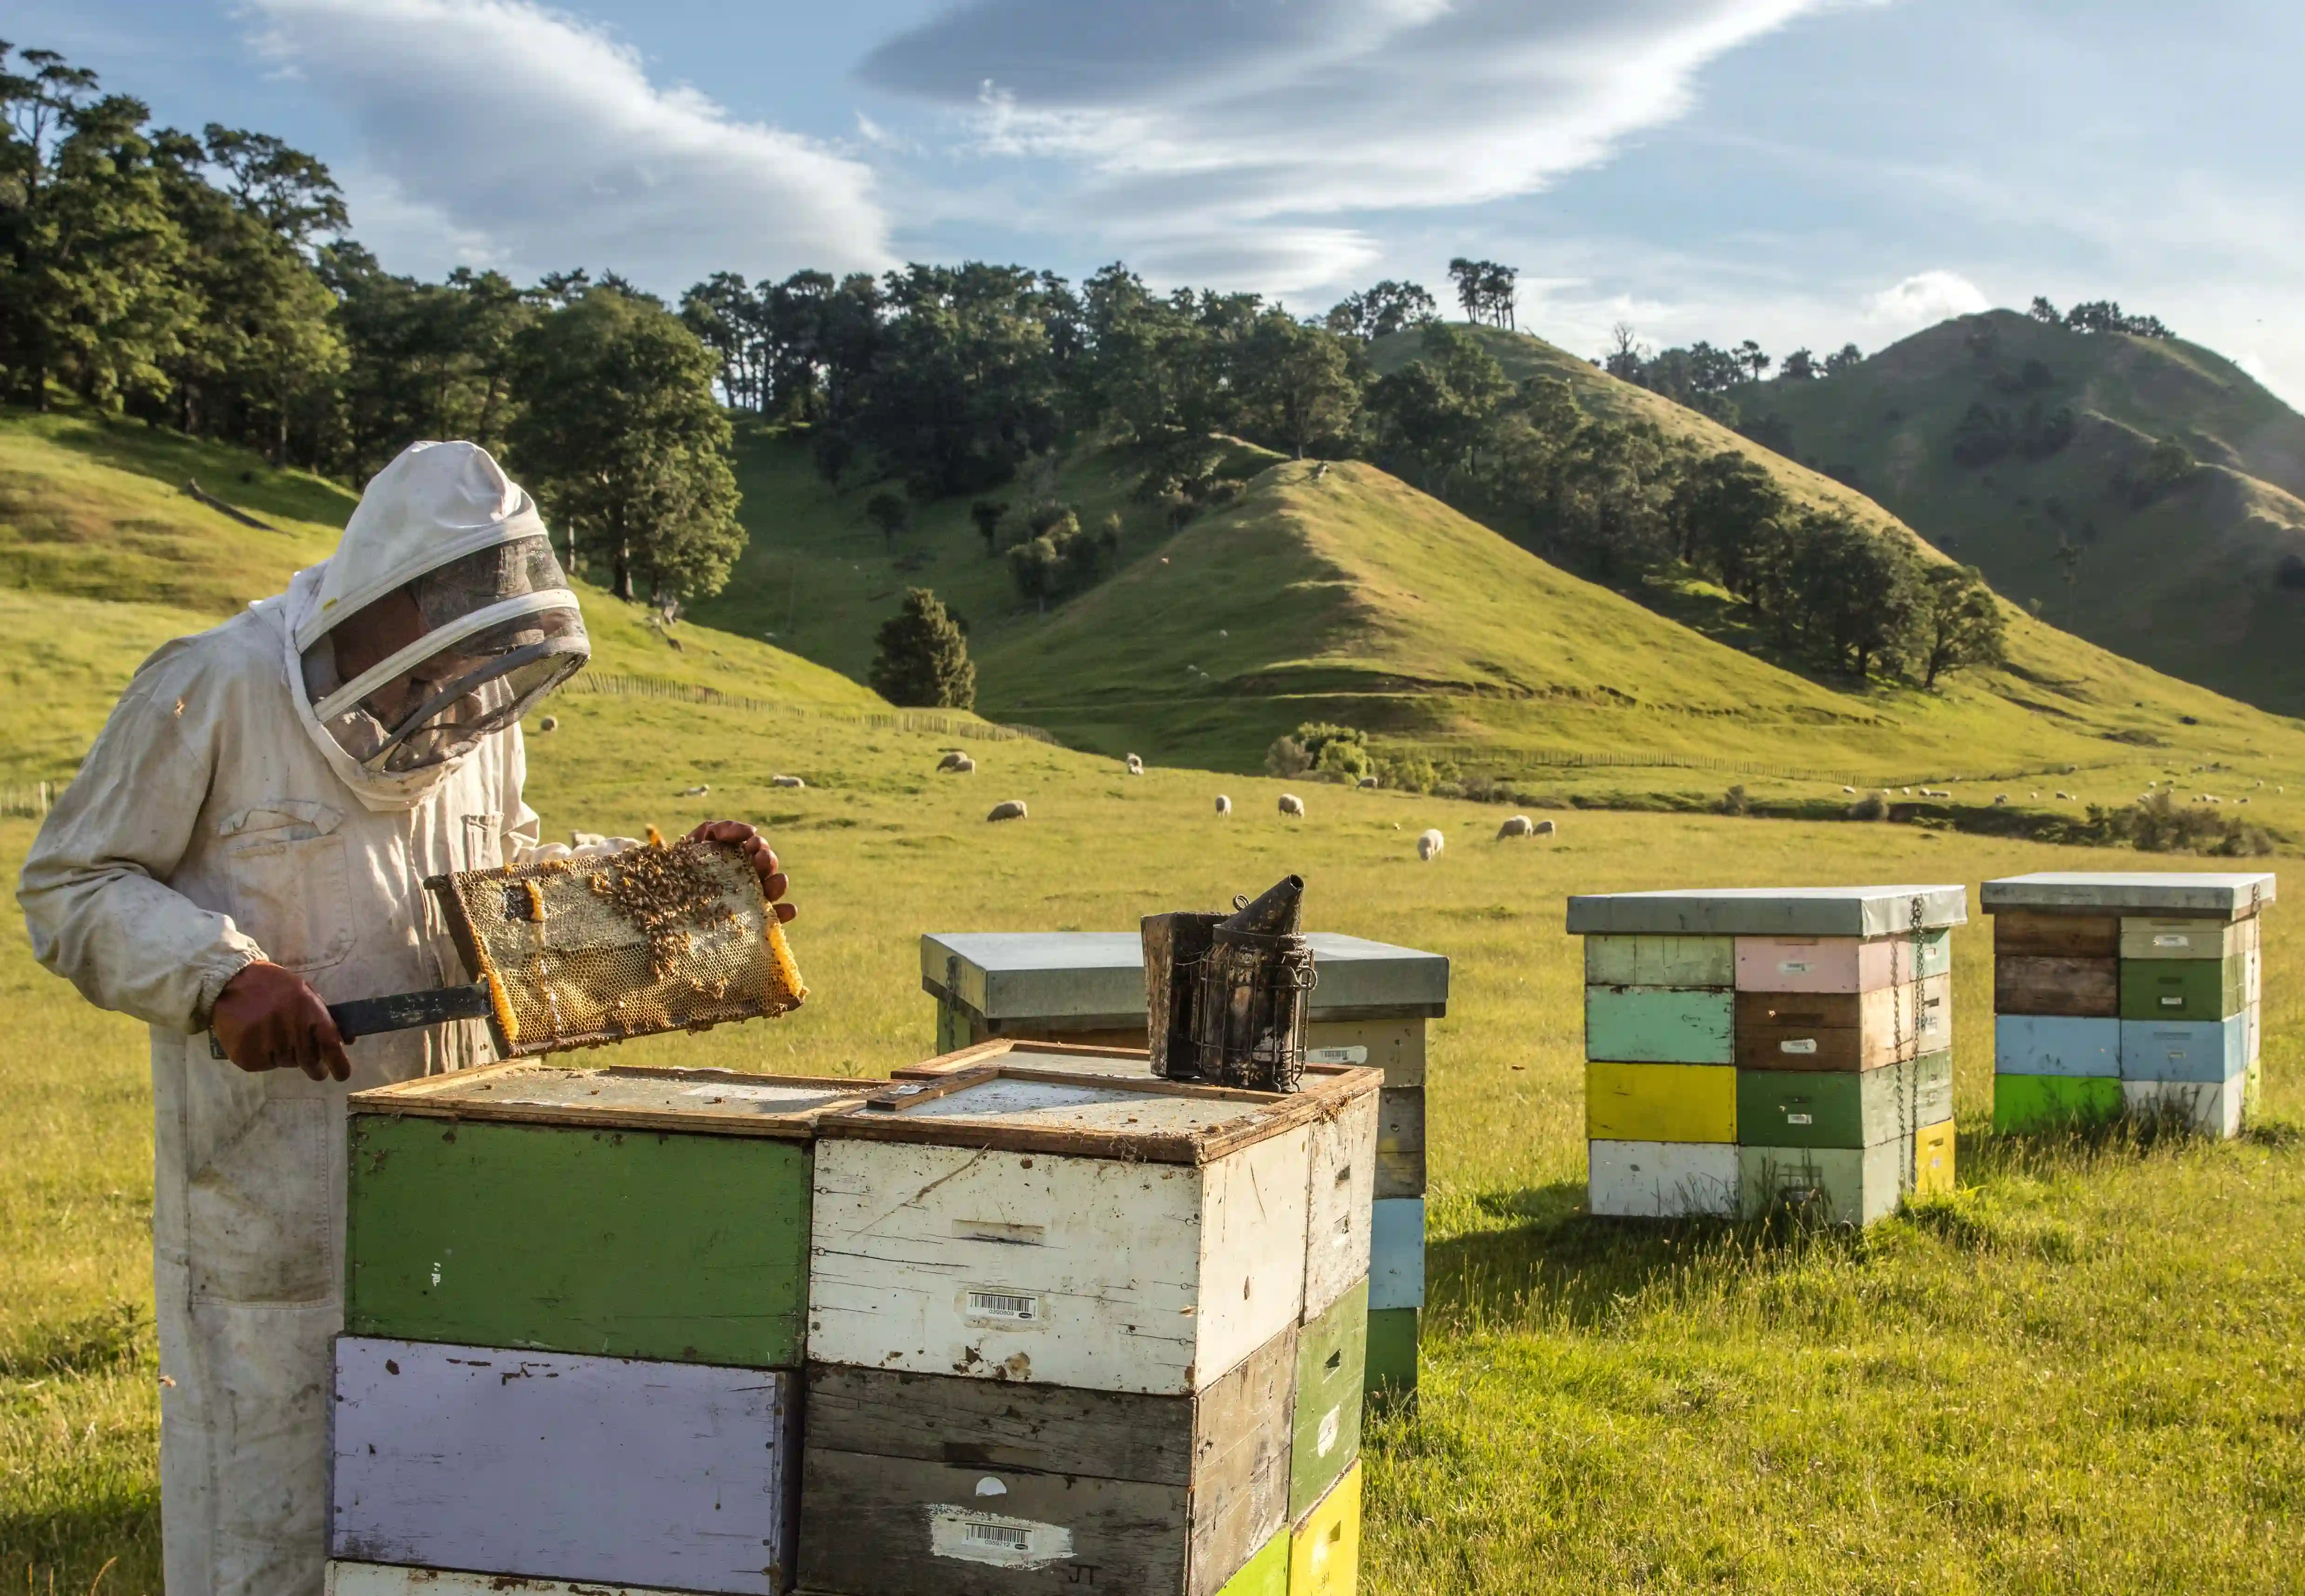 Hives in the field